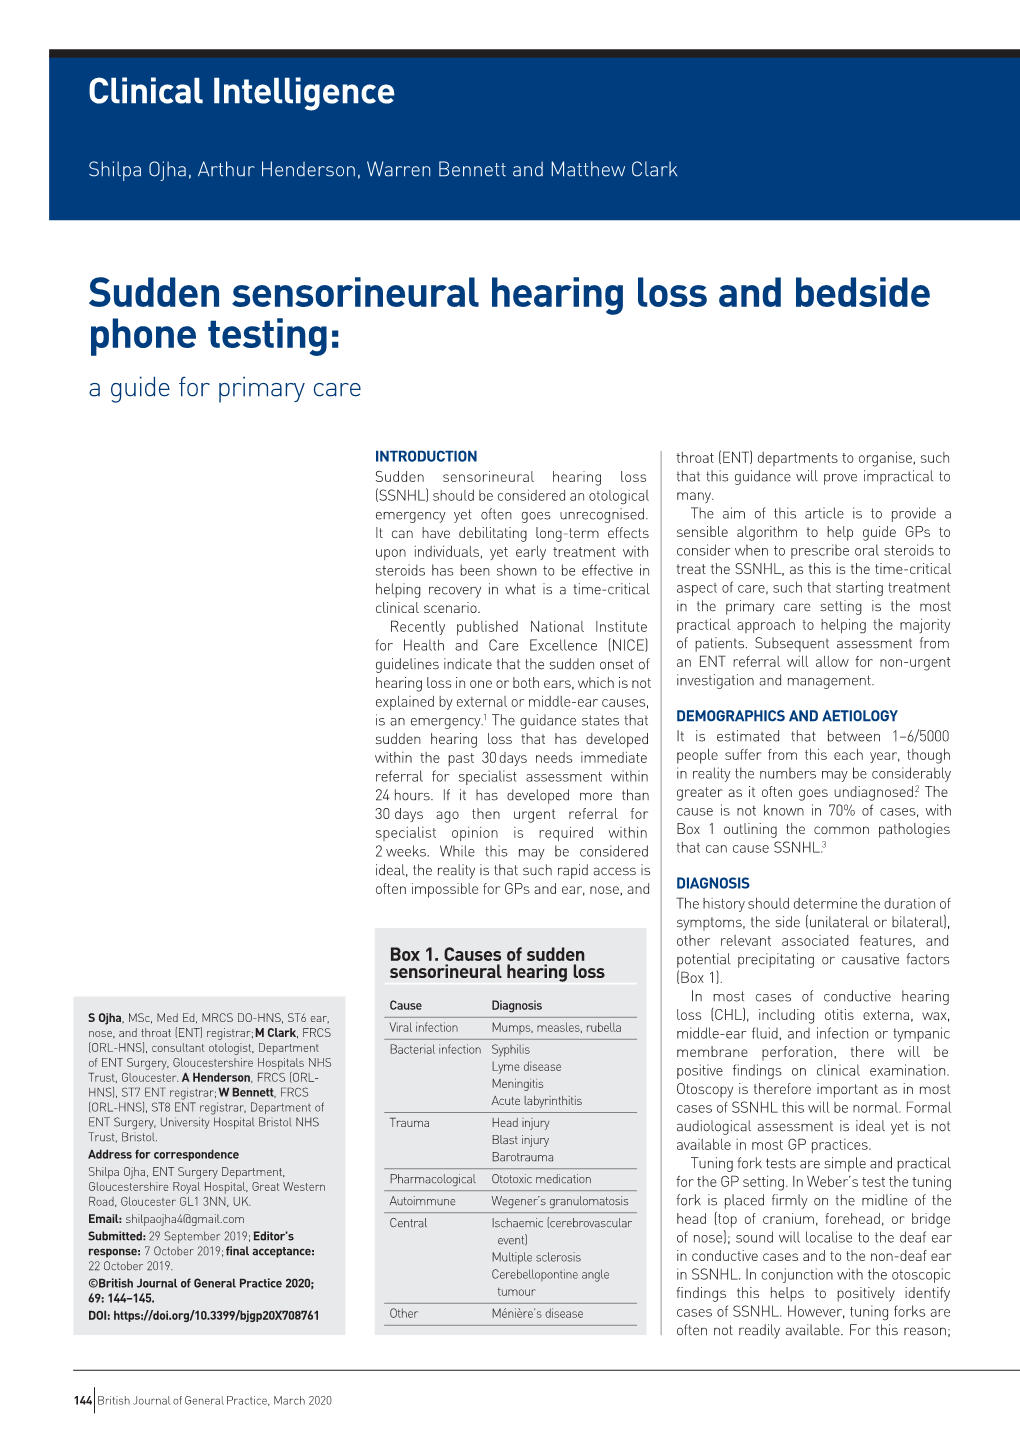 Sudden Sensorineural Hearing Loss and Bedside Phone Testing: a Guide for Primary Care